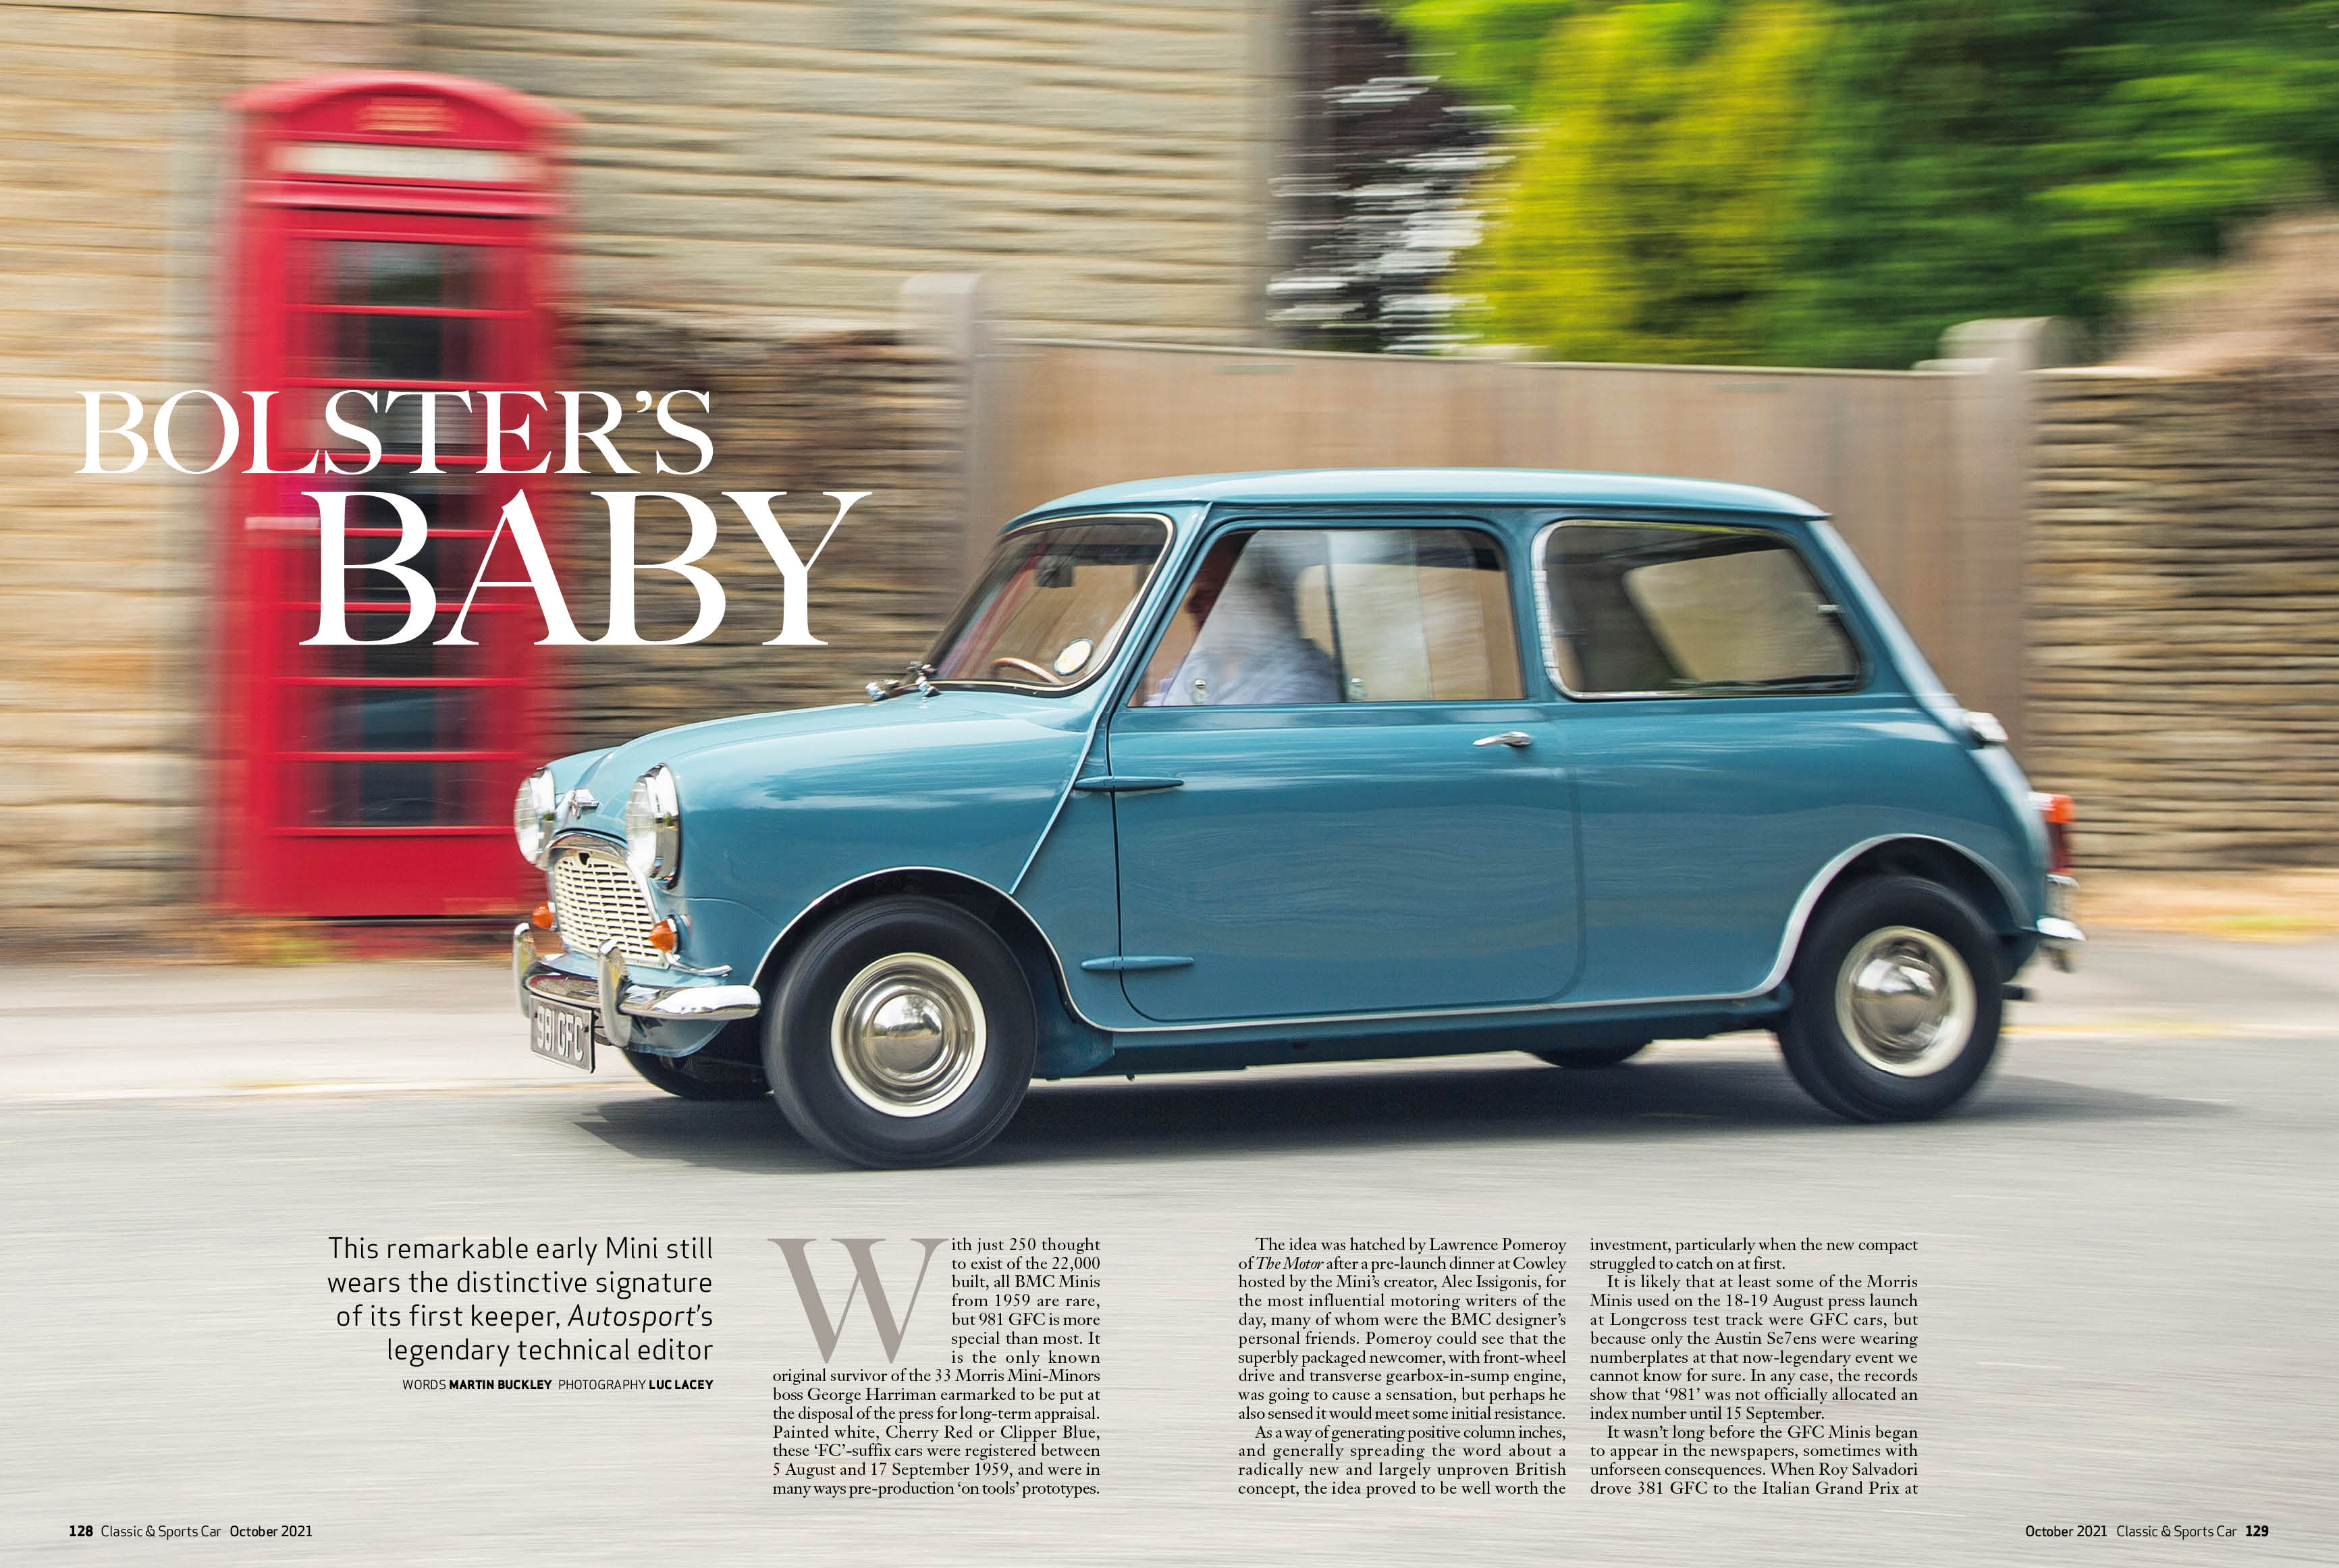 Classic & Sports Car – Greatest Bond cars: inside the October 2021 issue of C&SC